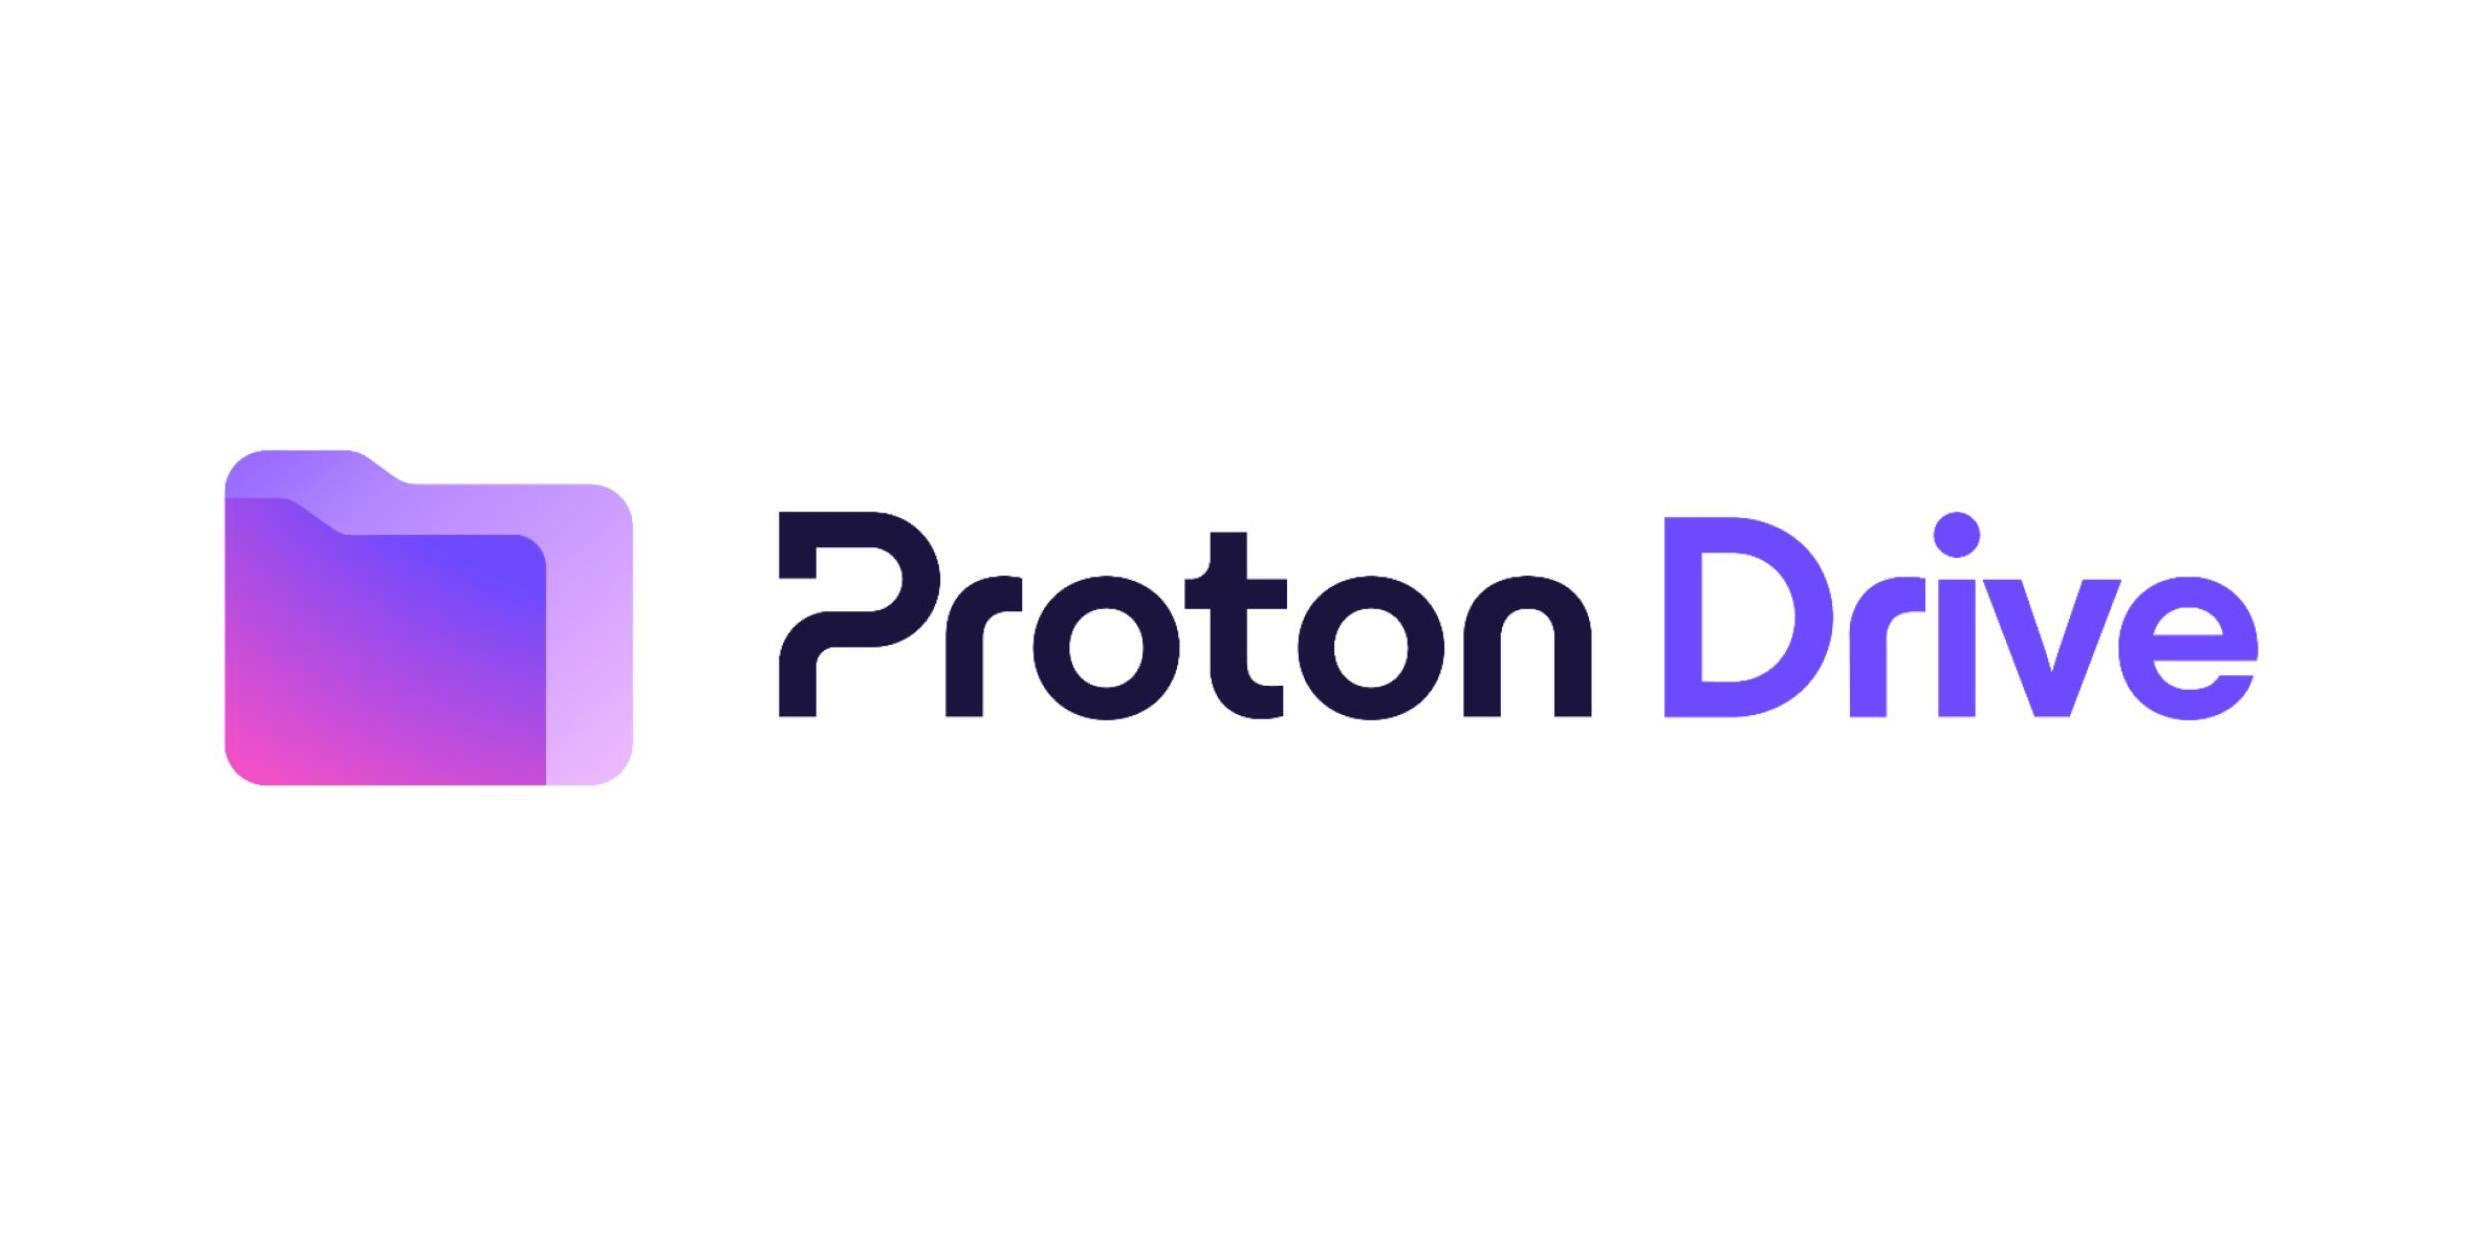 How to Fix "Cannot Upload: File No Longer Exists" Error on Proton Drive ? 5